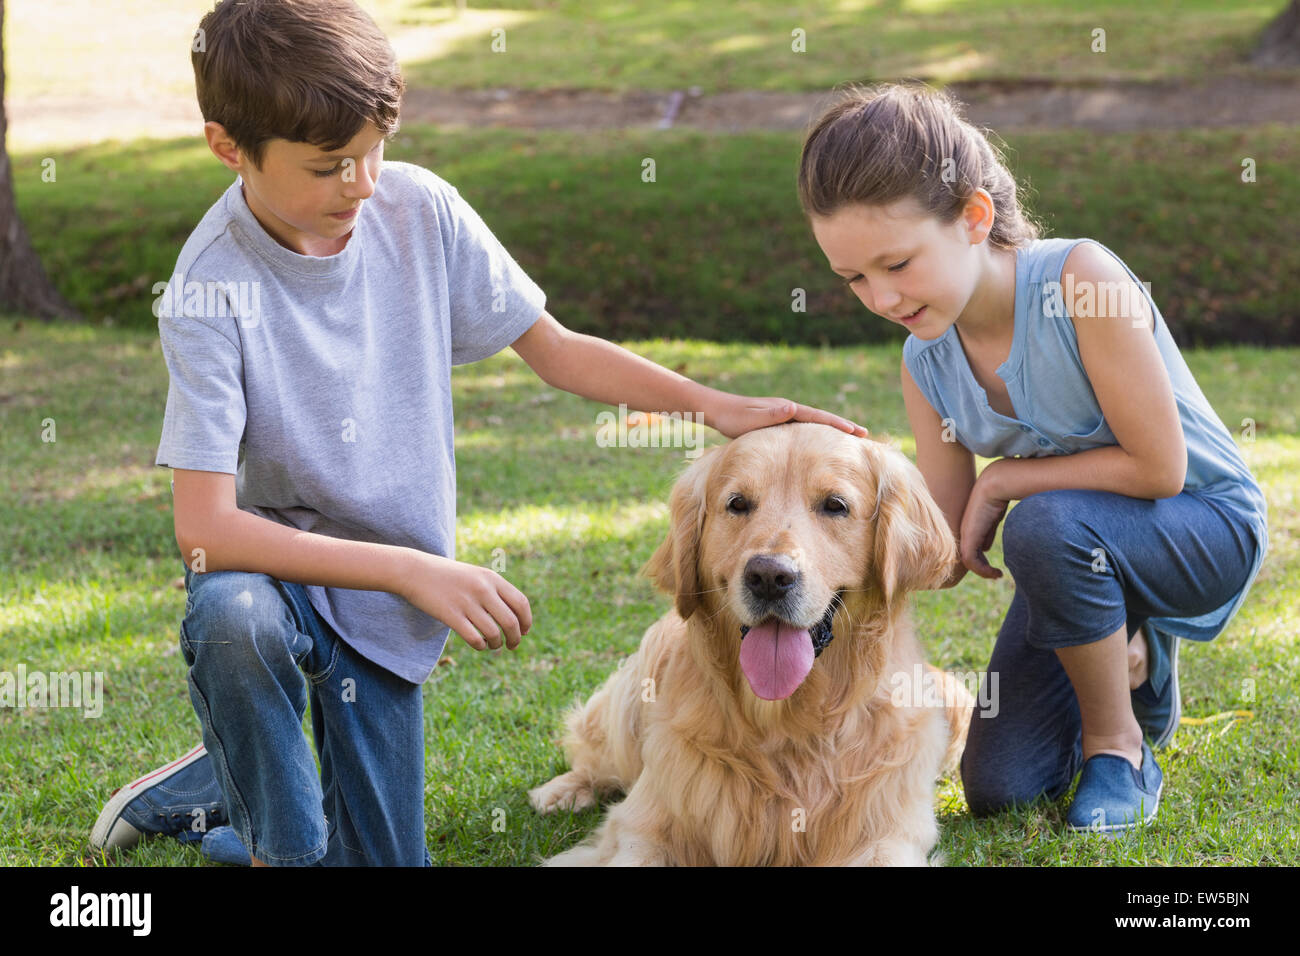 Sibling with their dog in the park Stock Photo